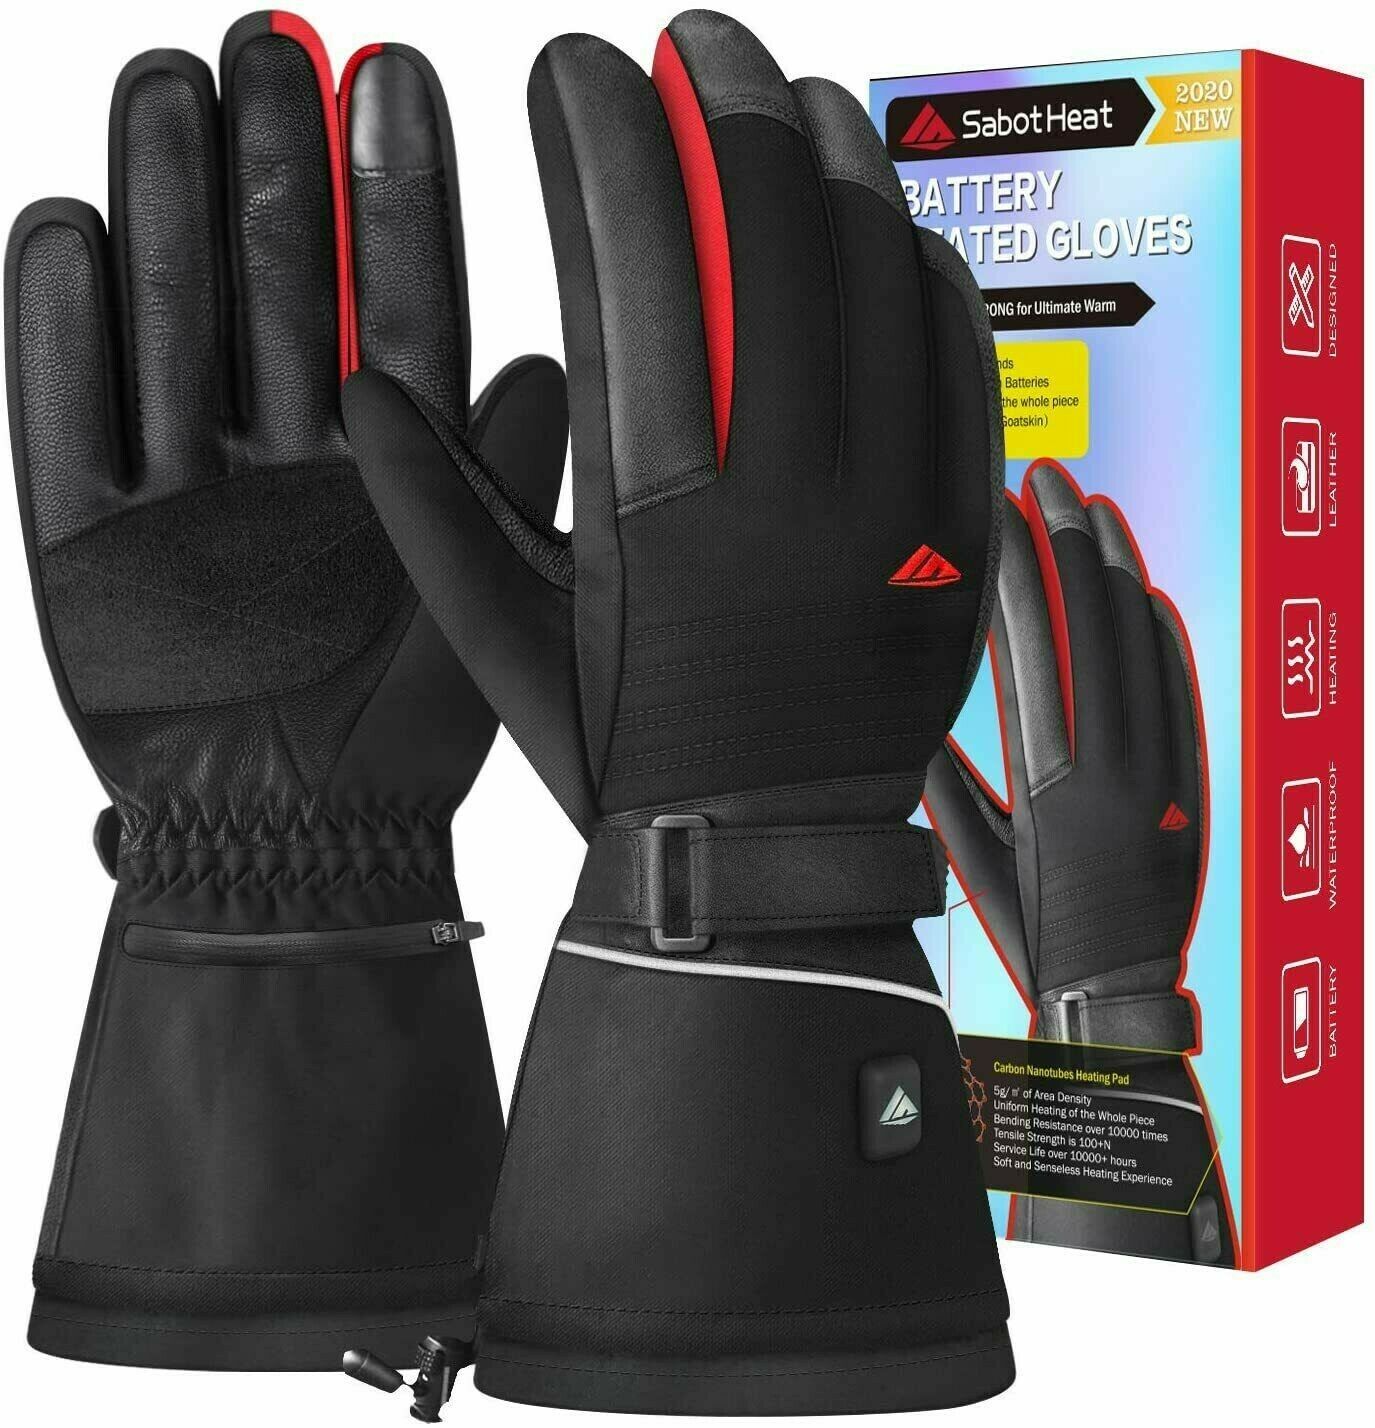 SabotHeat Battery Heated Gloves - Electric Heated Gloves for Men (XL) - e4cents